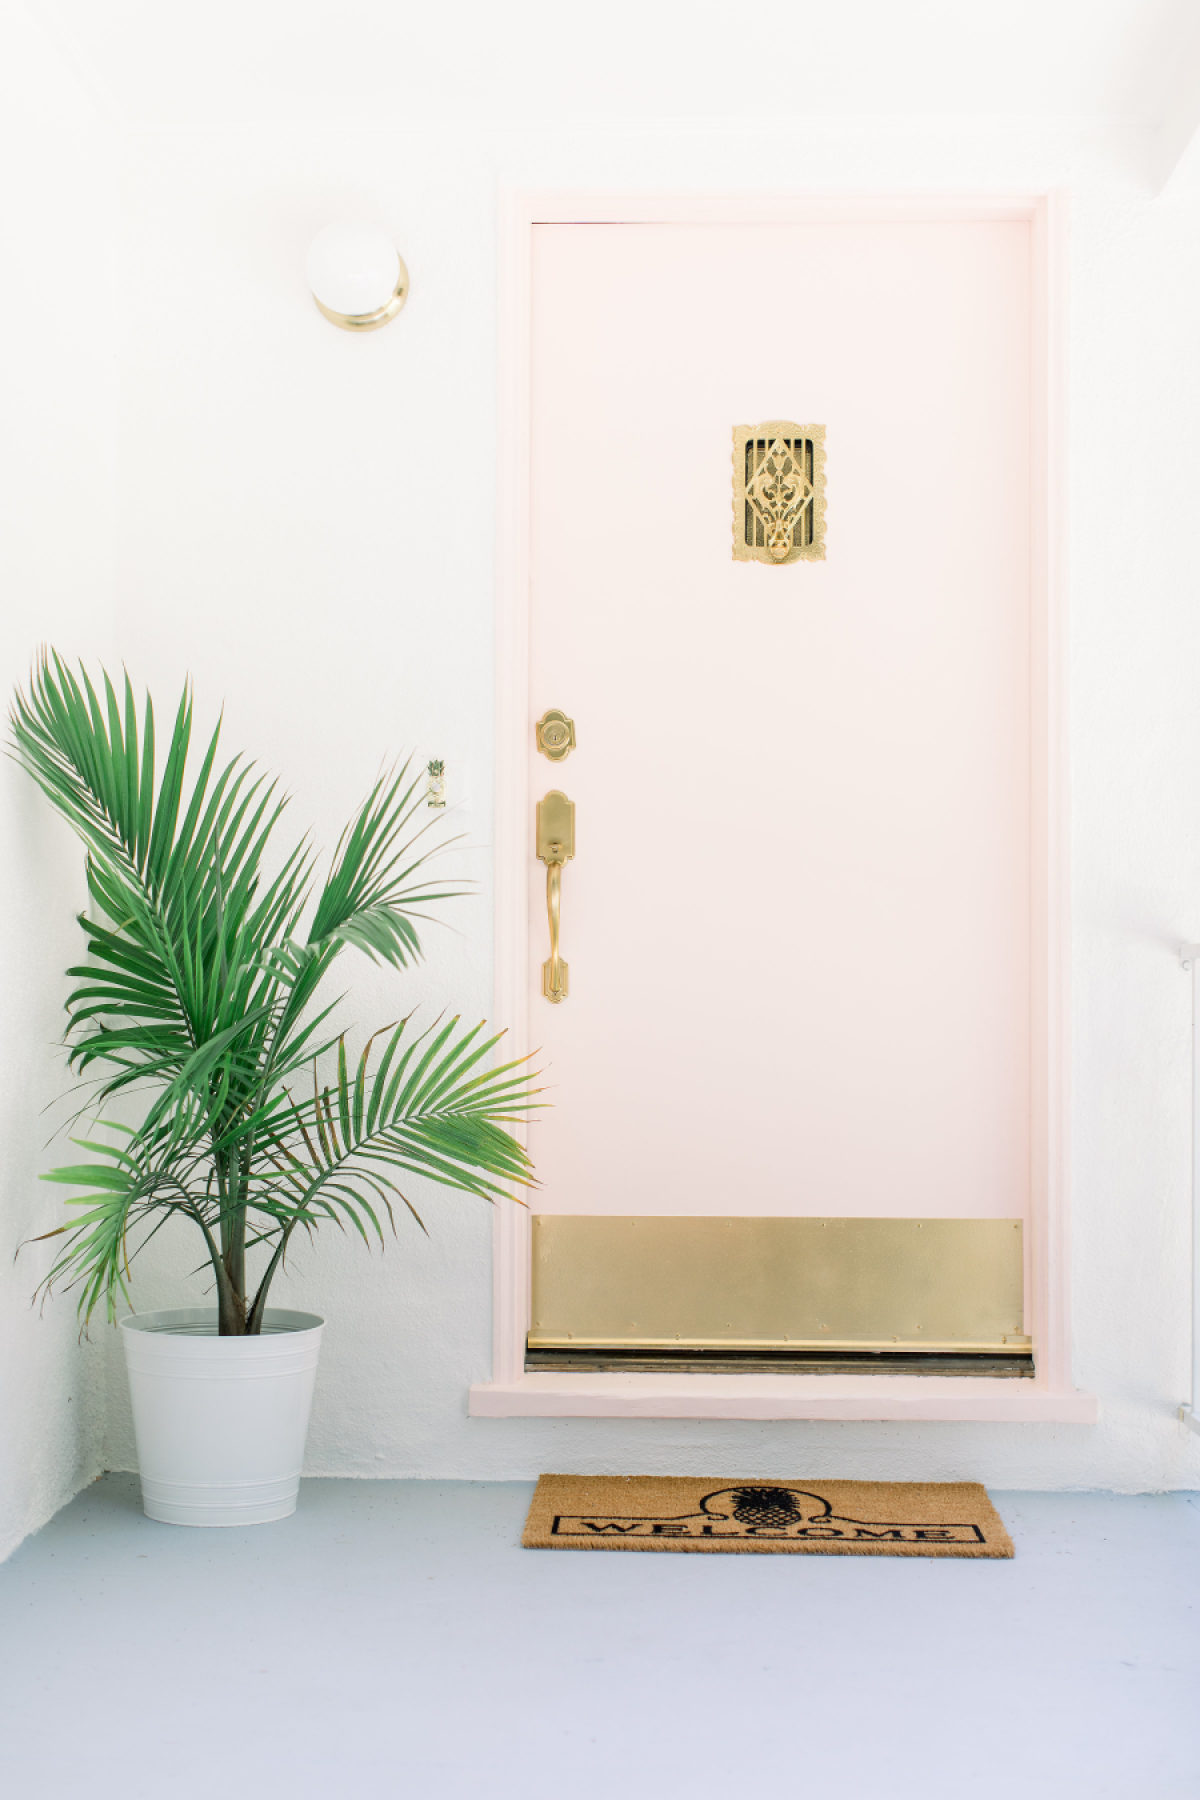 Ring the Pineapple Doorbell on This Blushing Pink Cottage